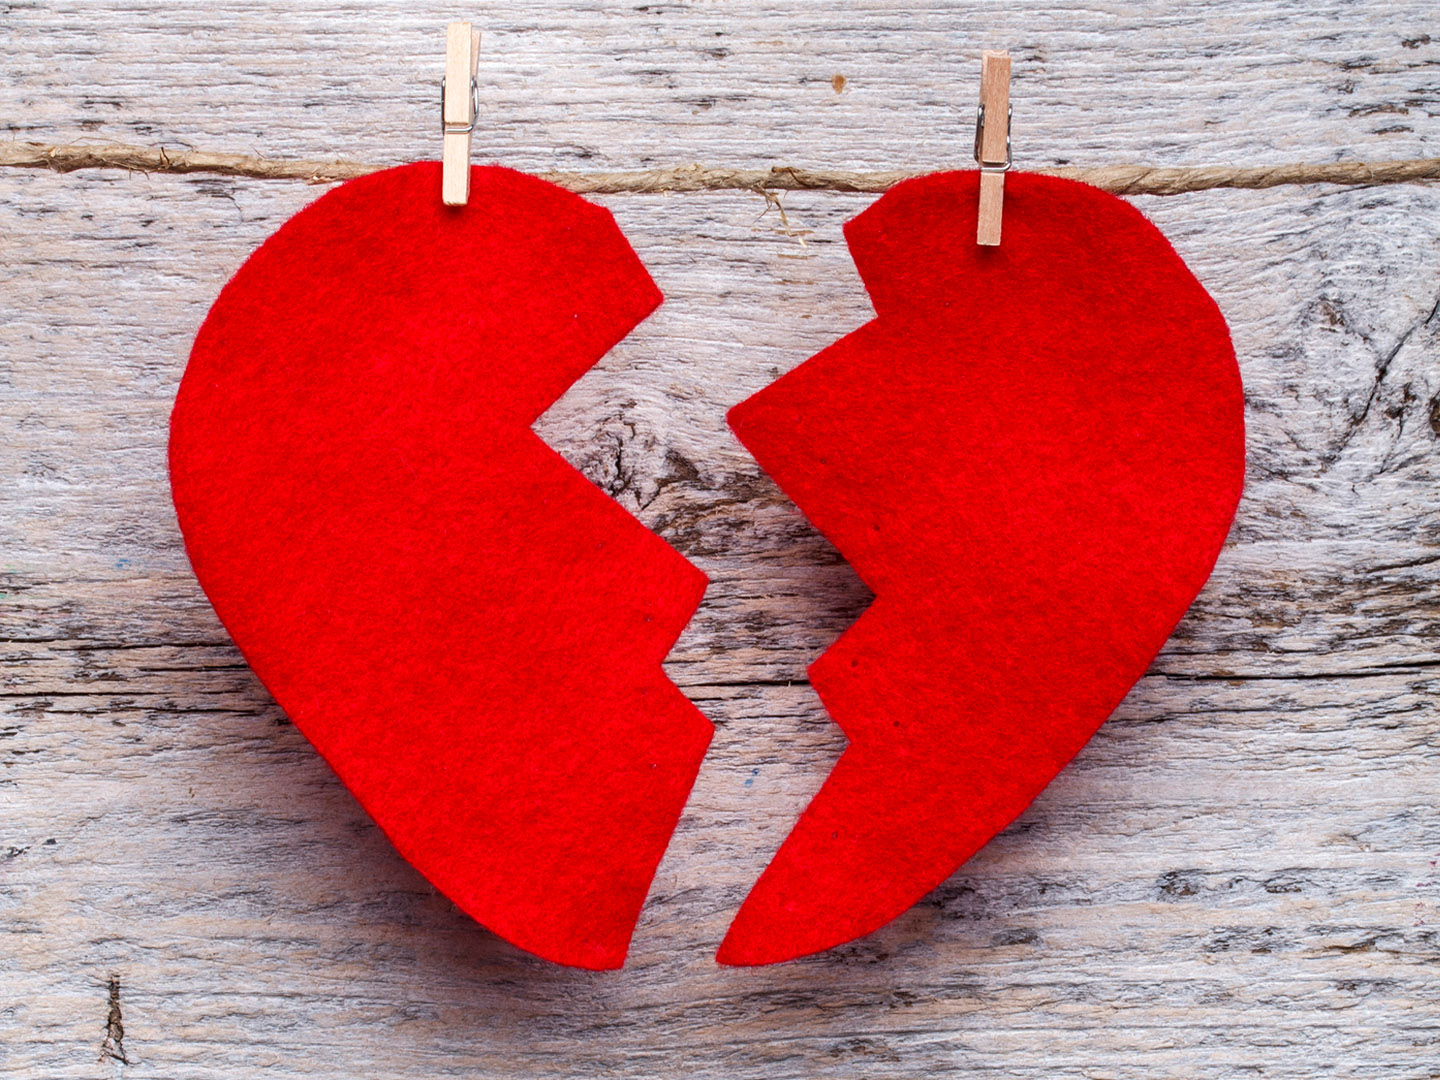 More News About Broken Heart Syndrome Andrew Weil Md